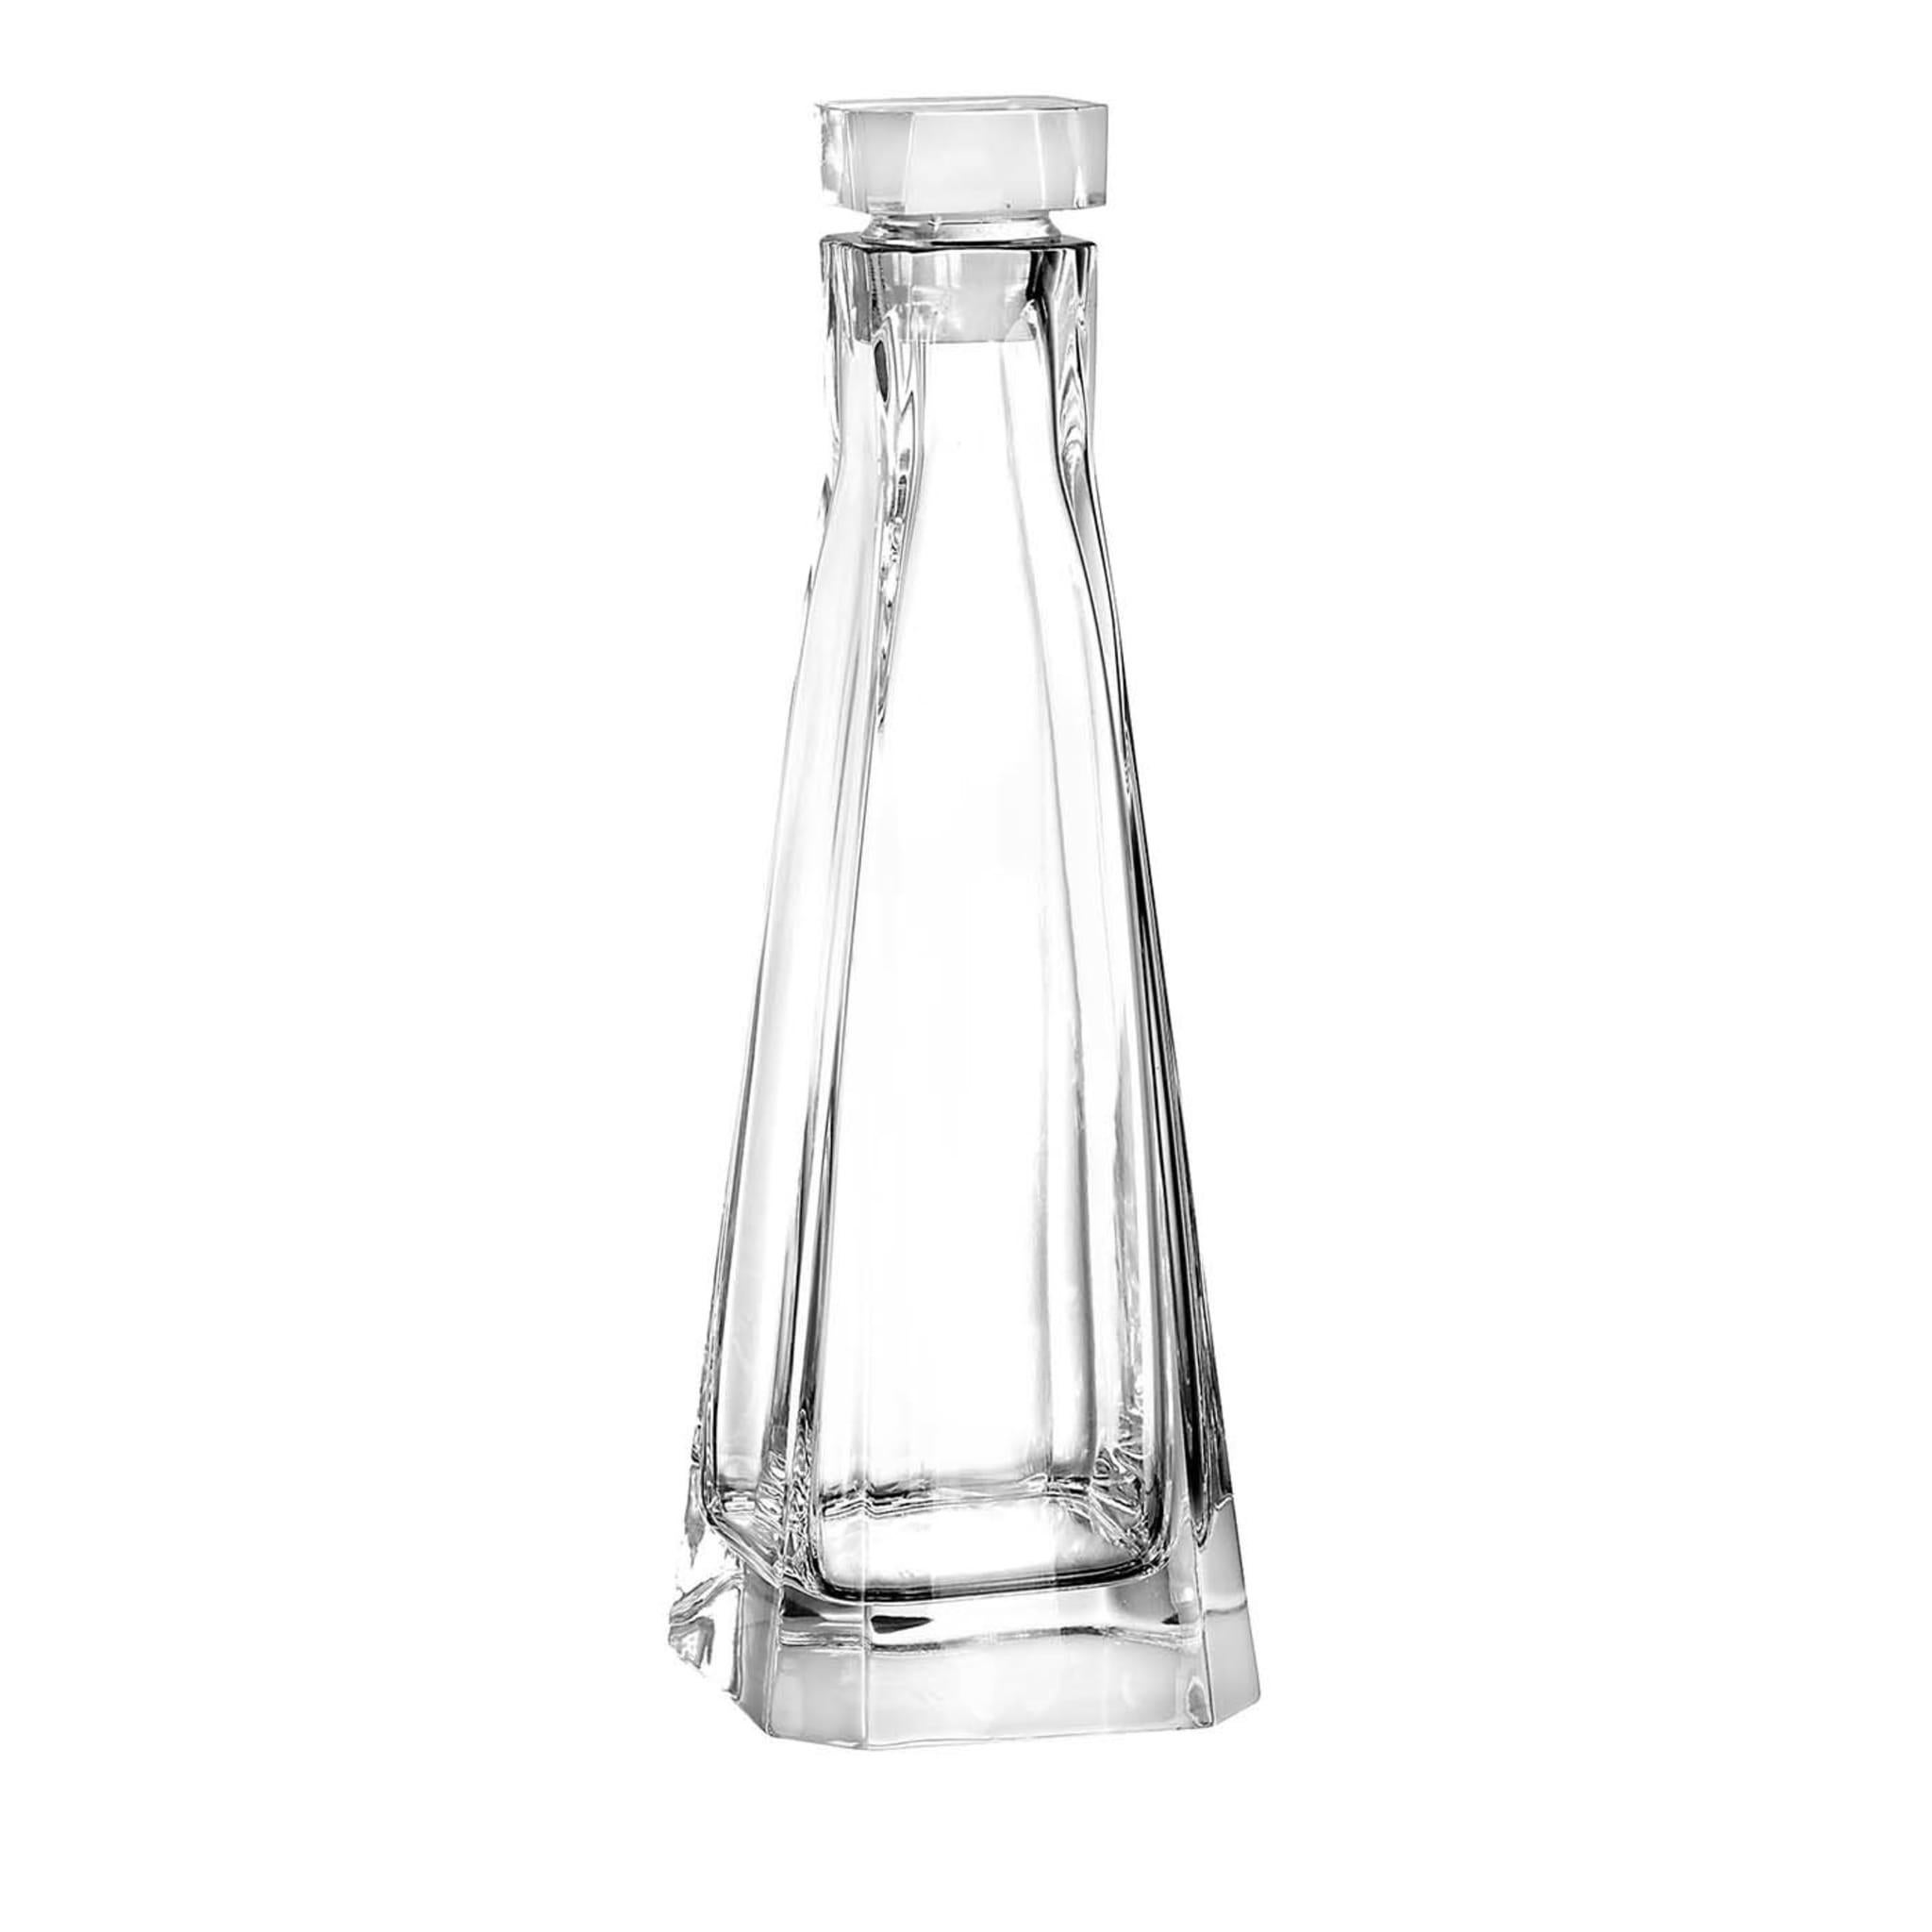 Part of the Cibi Collection designed by Cini Boeri in 1973, this charming decanter is a precious and elegant addition to both a classic and a modern home, where it can be displayed on a bar cabinet, a sideboard, or a dining table. Its linear